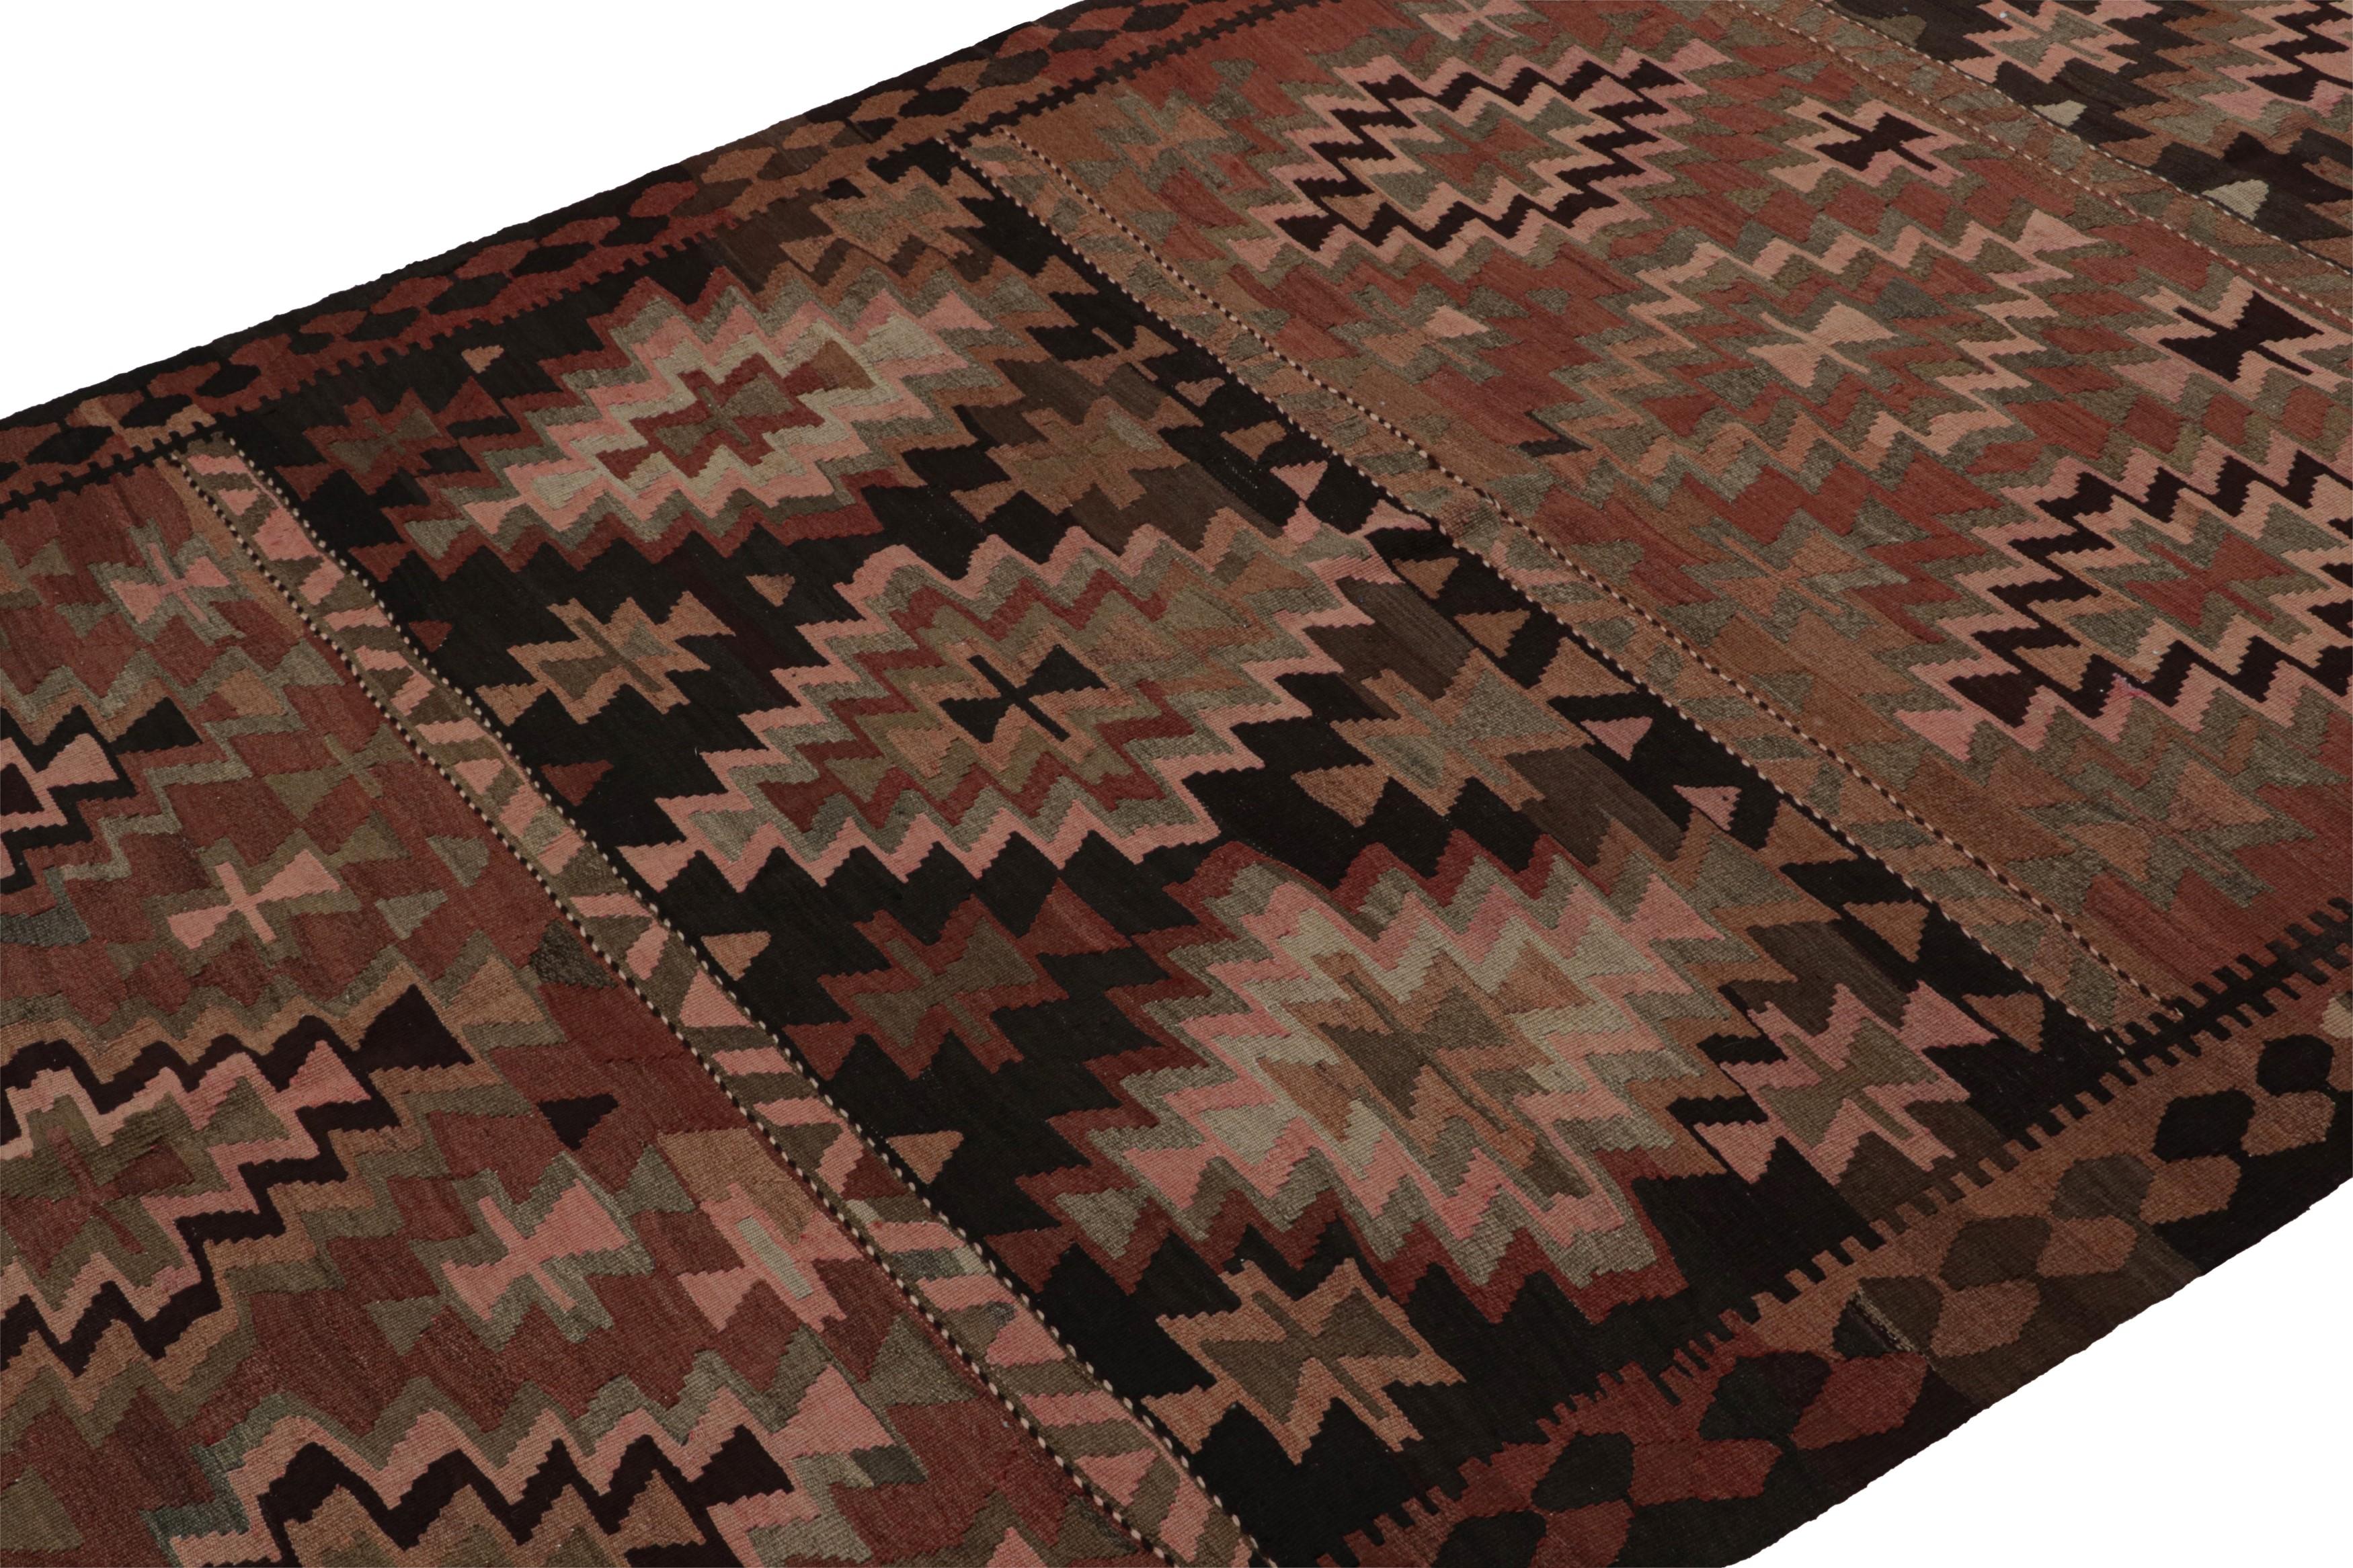 Hand-Woven Vintage Afghan Kilim Runner Rug, with Geometric Patterns, from Rug & Kilim